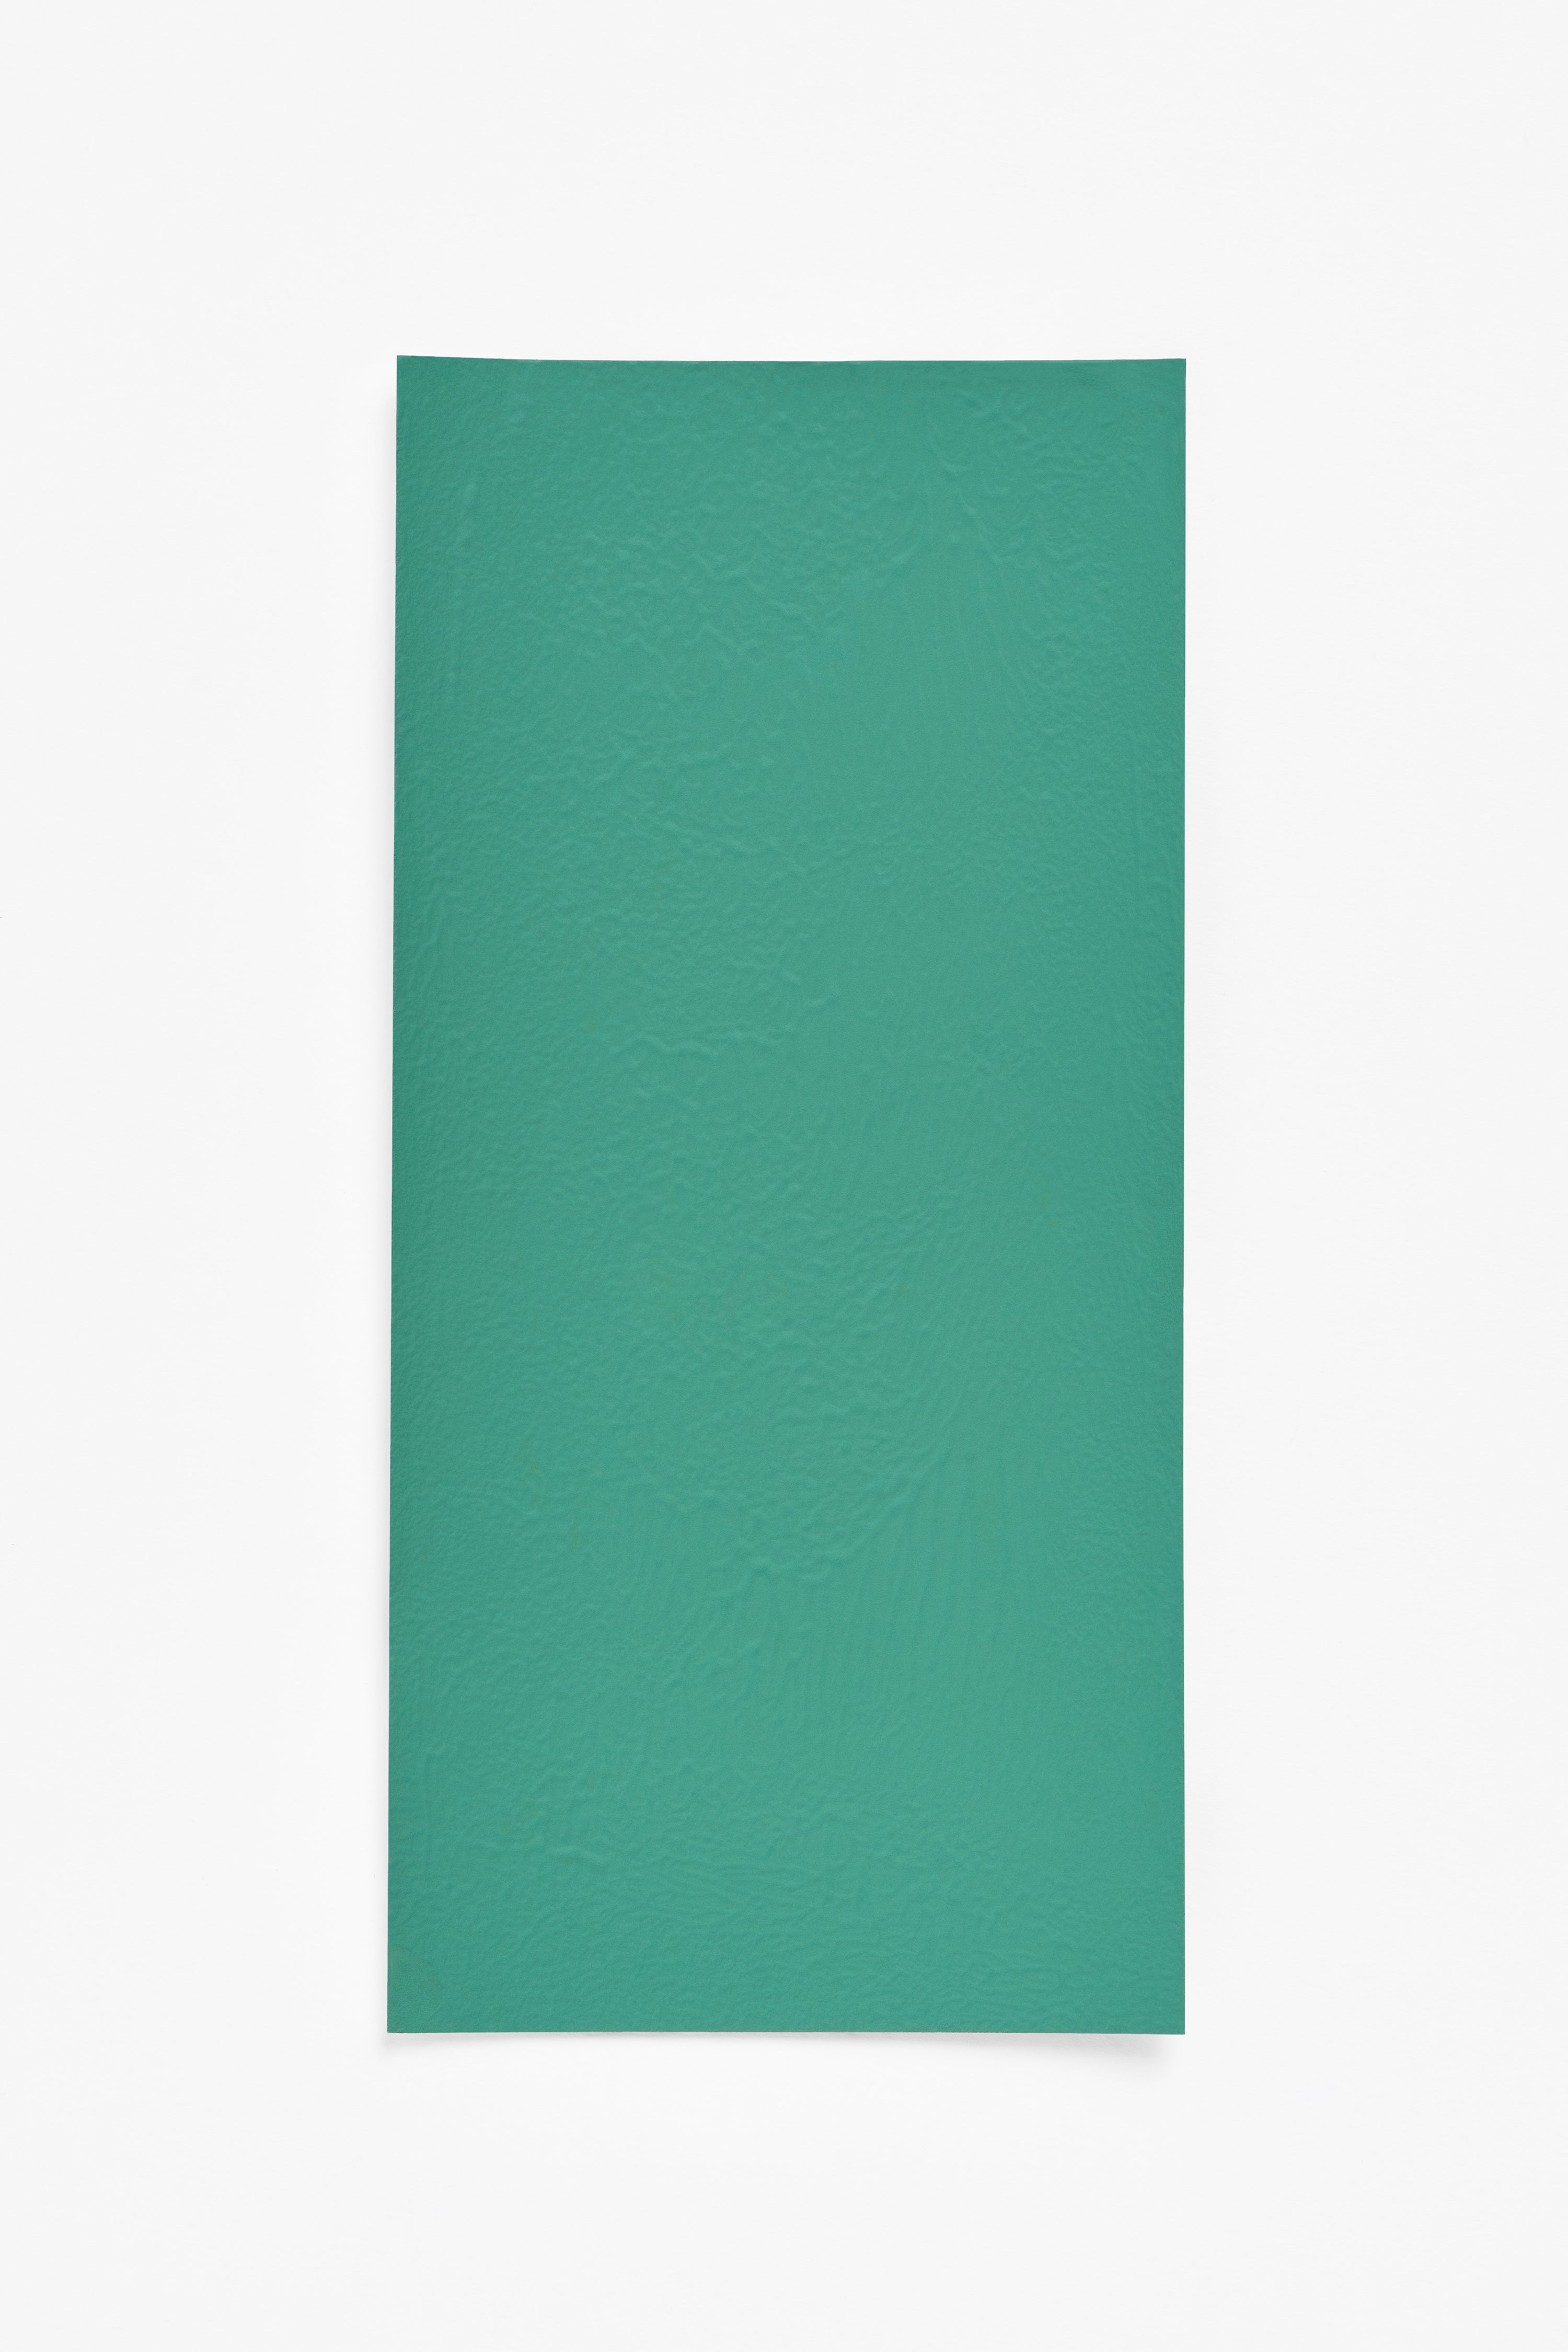 Emerald — a paint colour developed by Barber Osgerby for Blēo